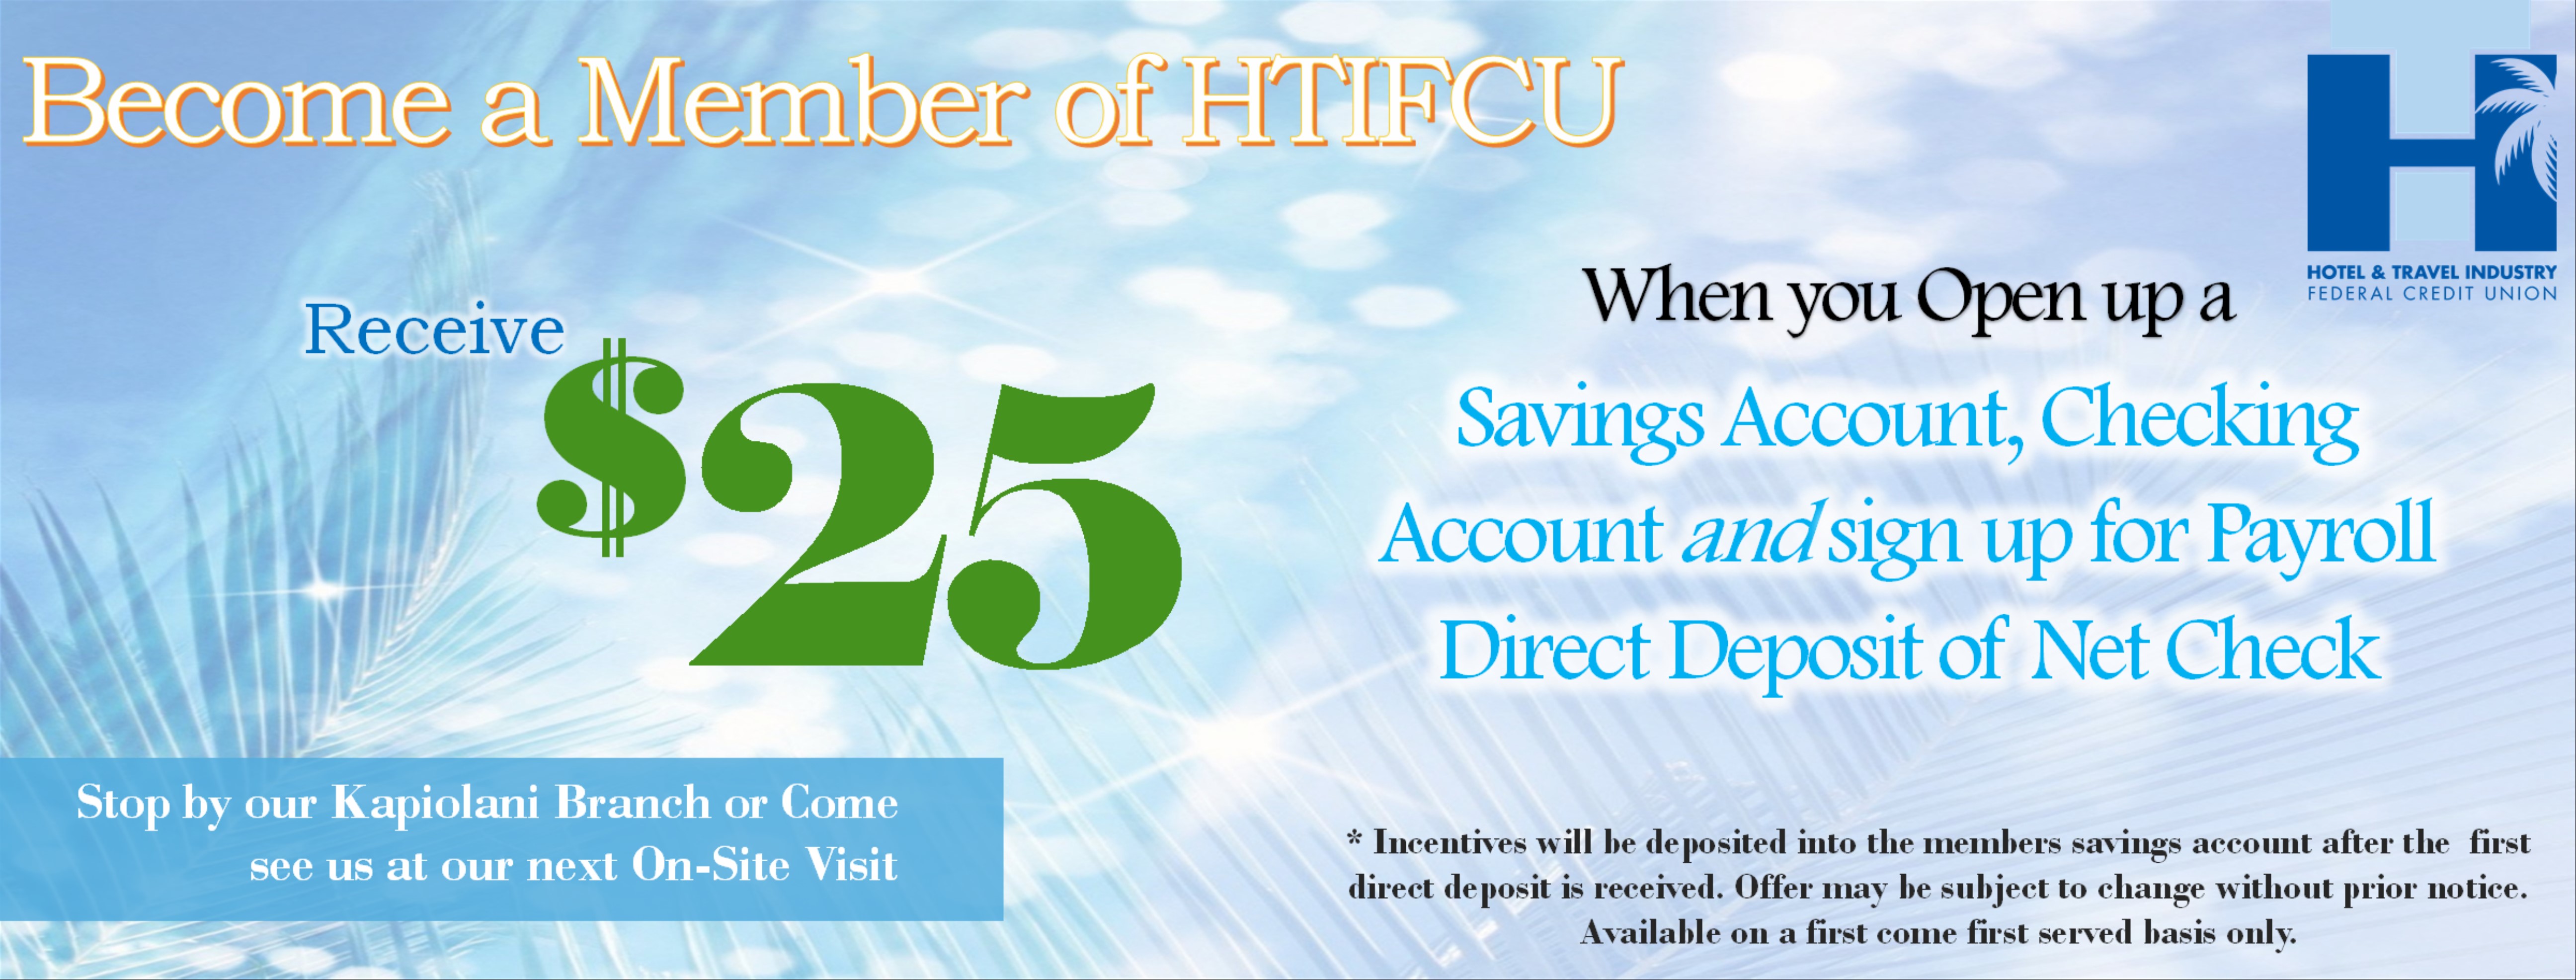 Special Offers Hotel & Travel Industry Federal Credit Union